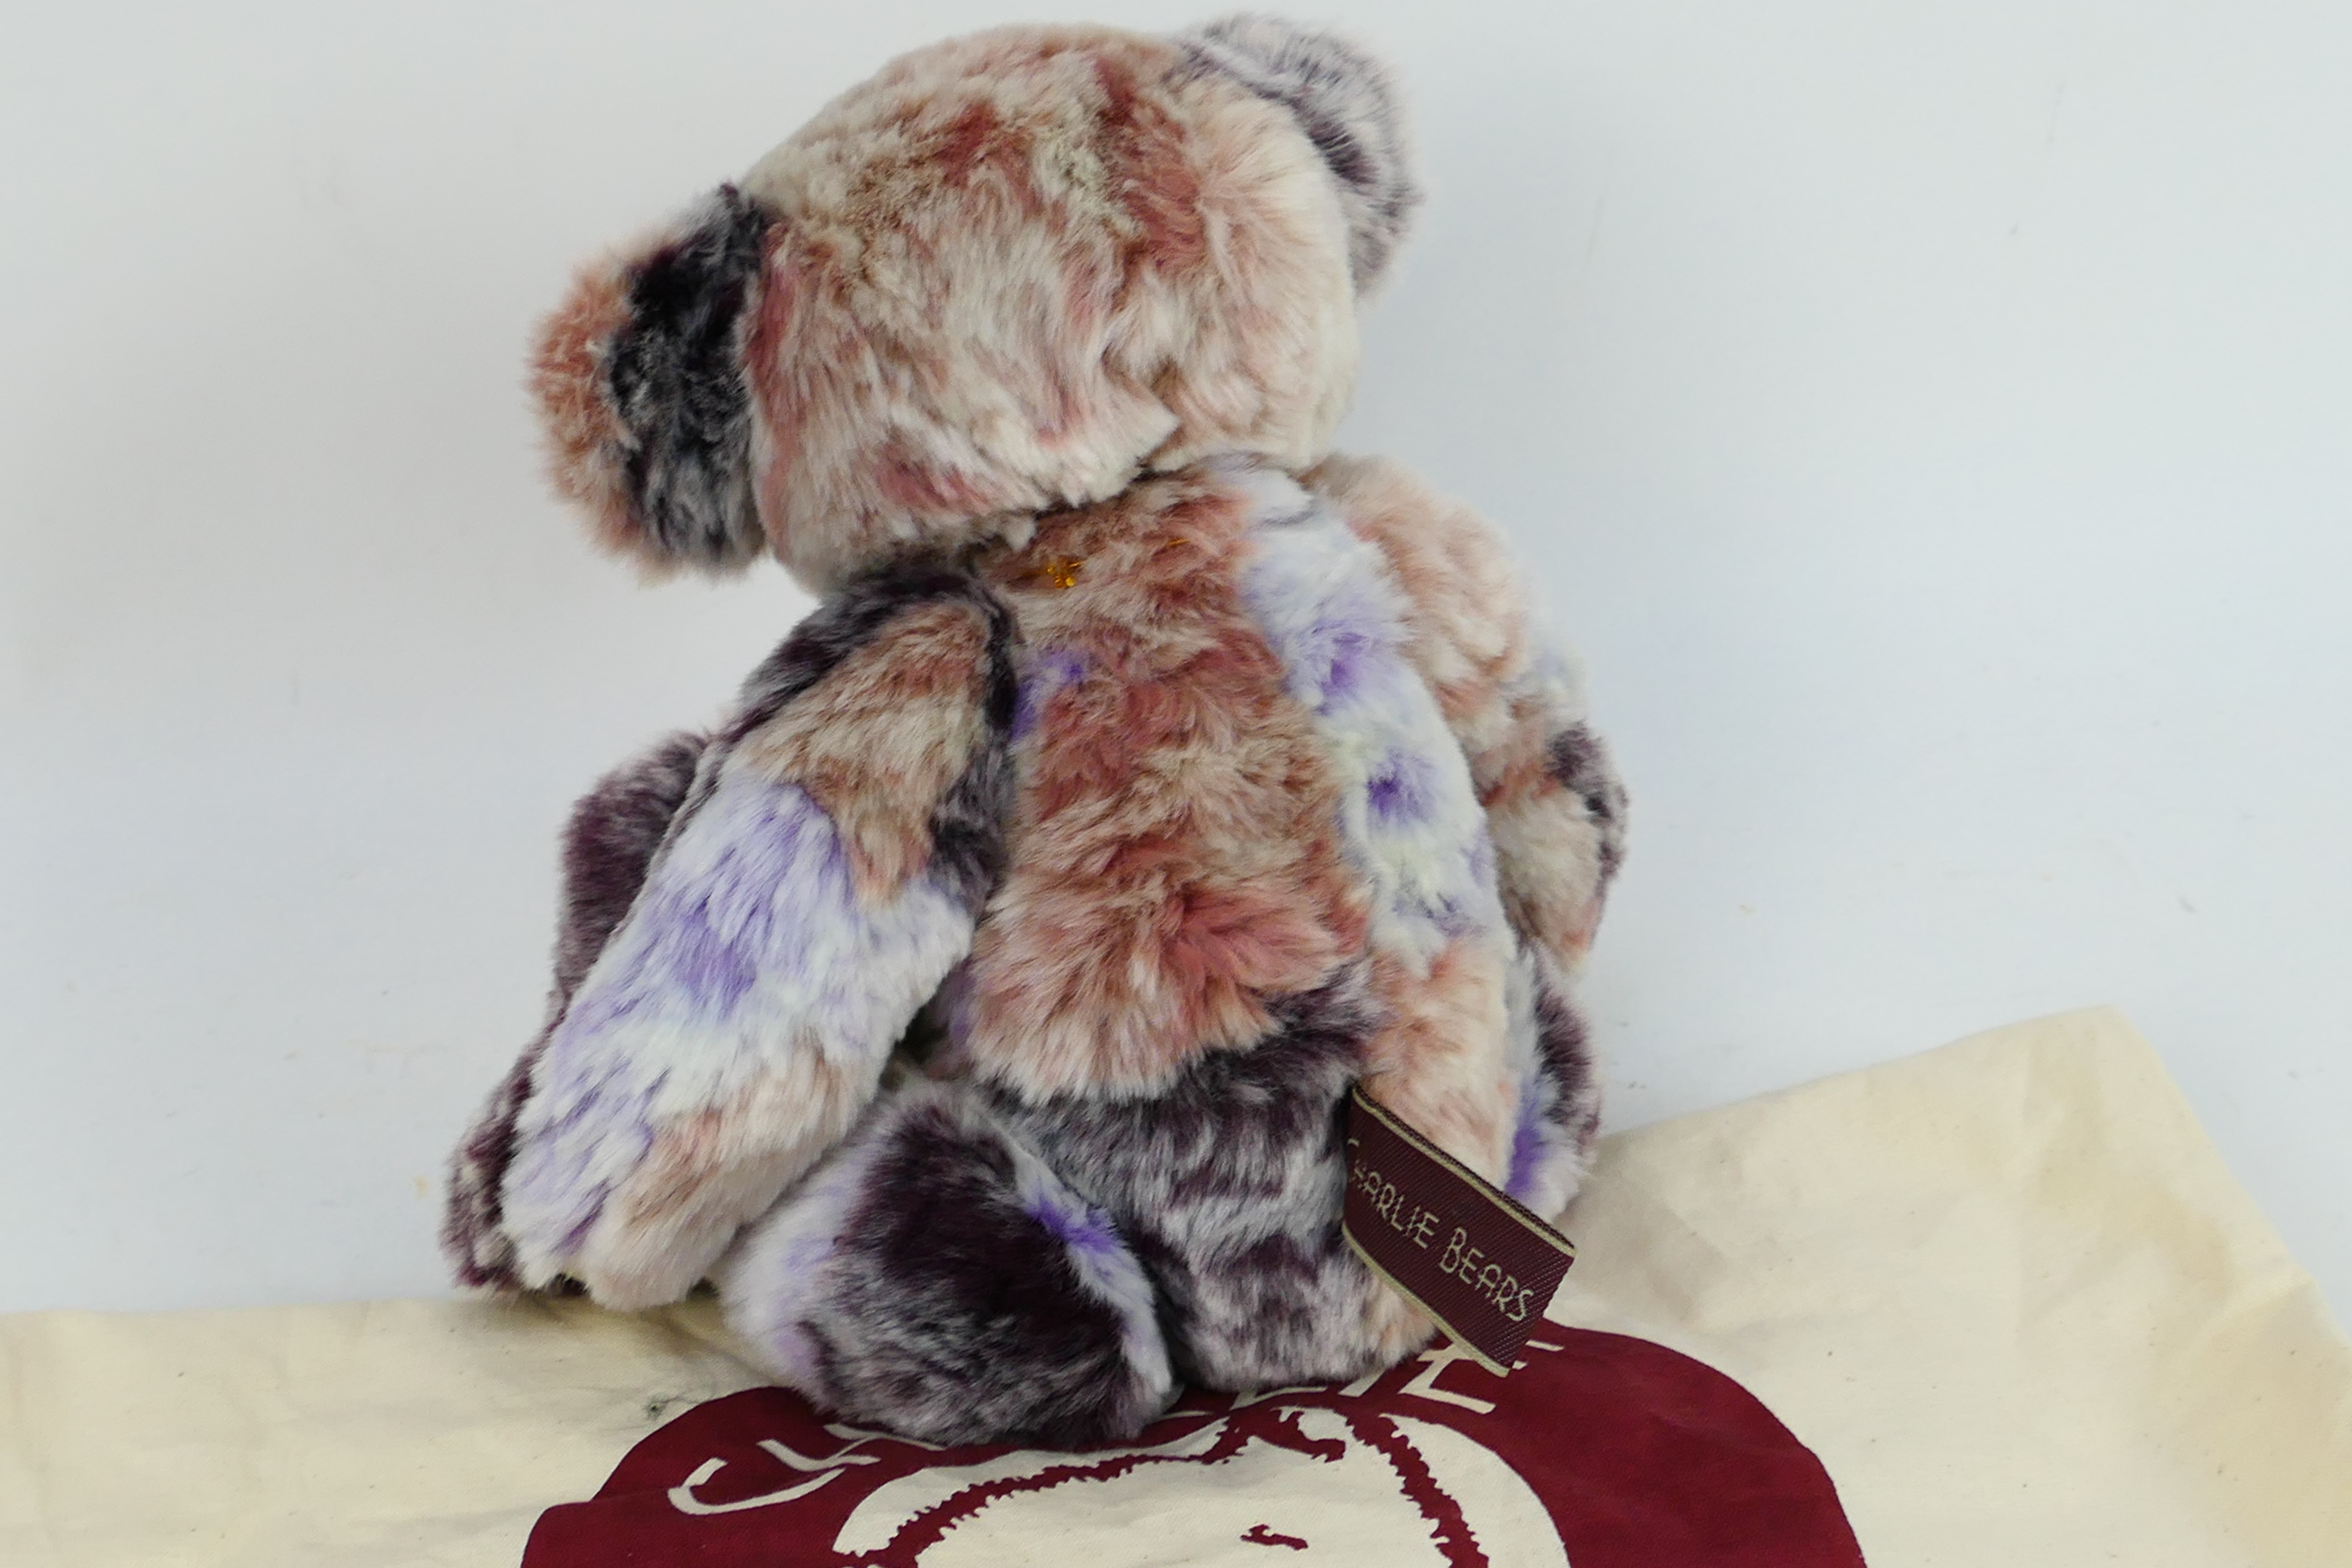 Charlie Bears - A Charlie Bears soft toy teddy bear #CB604748C 'Ragsy', designed by Isabelle Lee, - Image 5 of 5